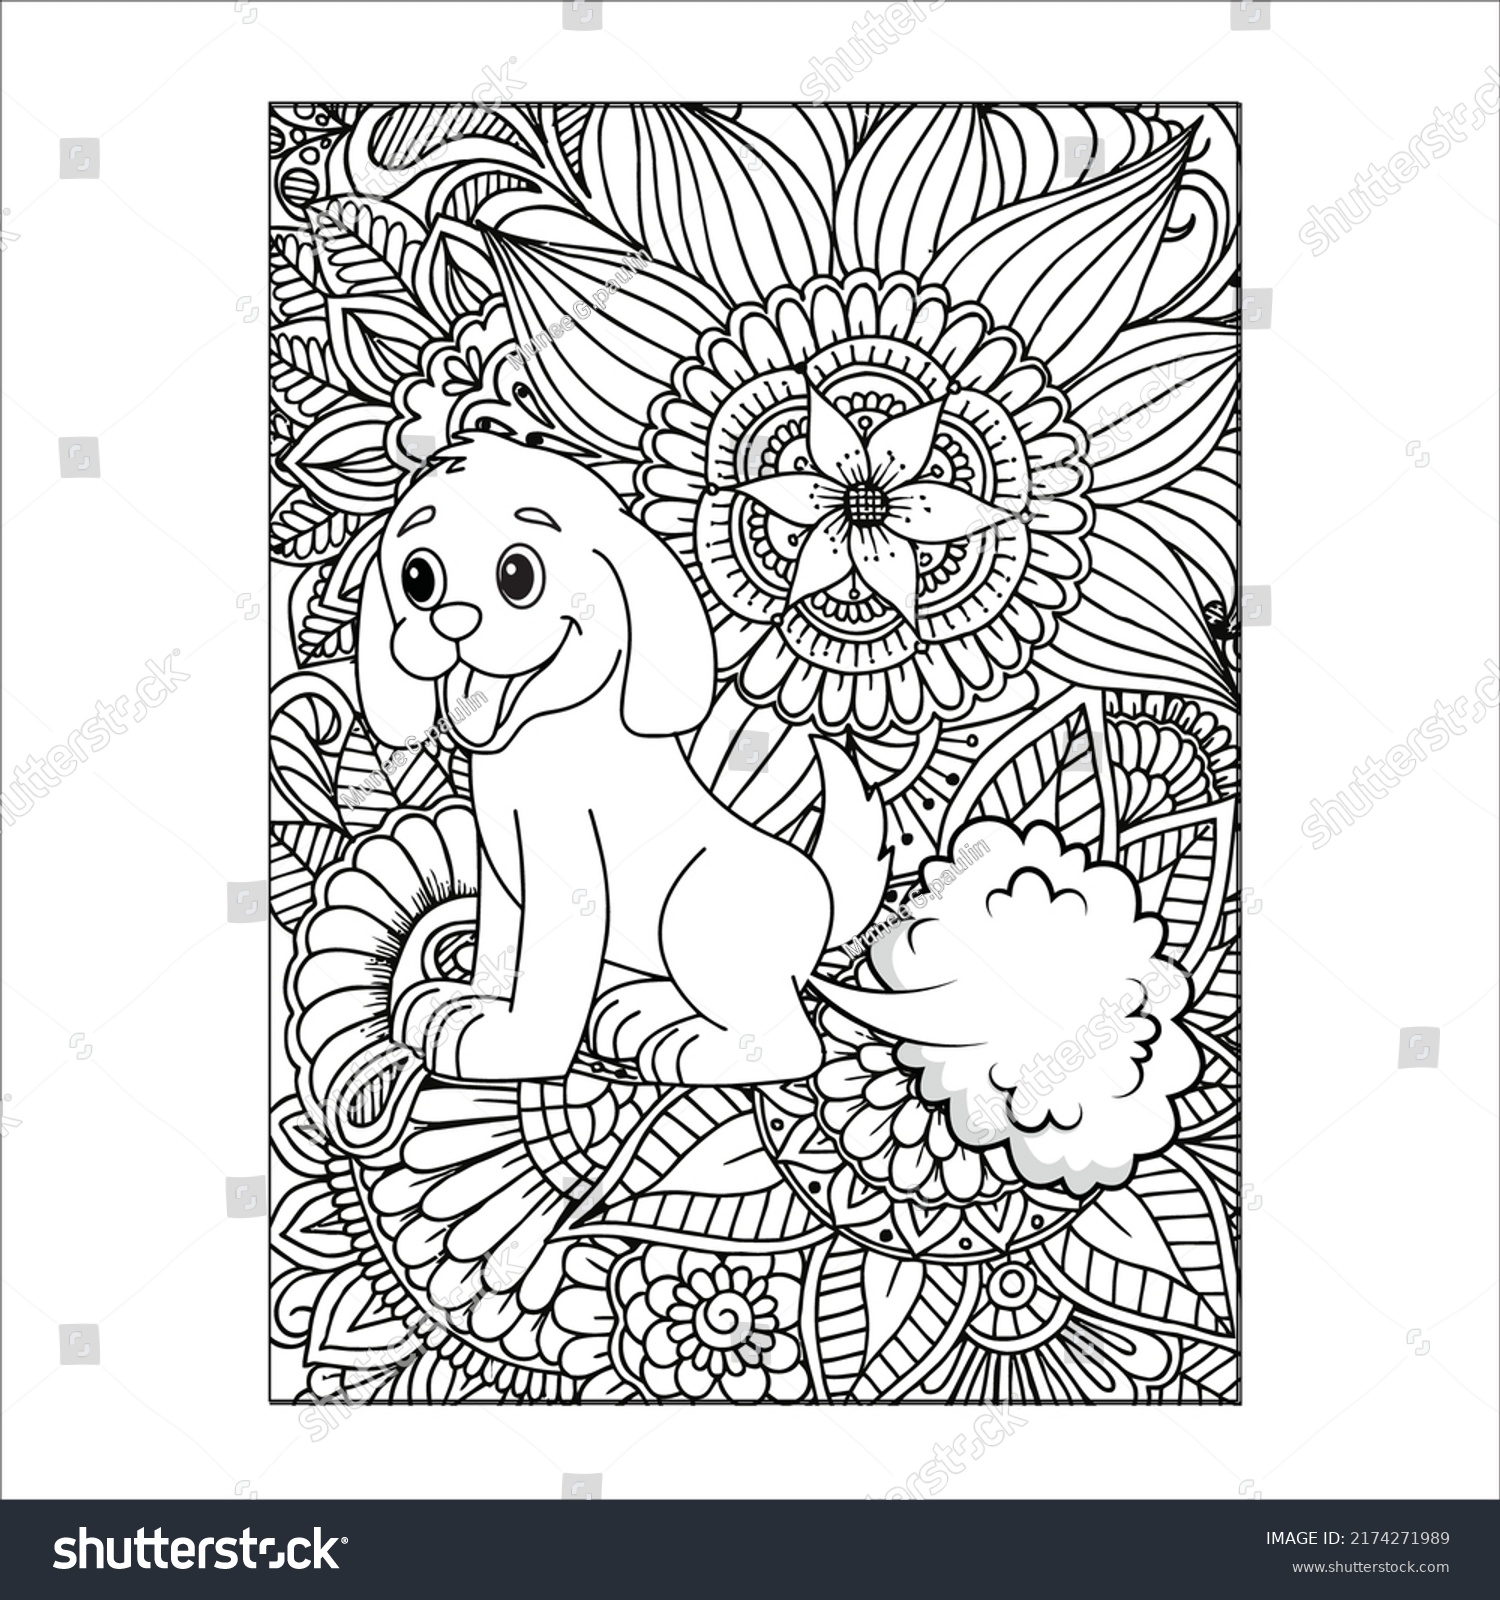 Farting Animals Coloring Page Funny Coloring Stock Vector (Royalty Free ...